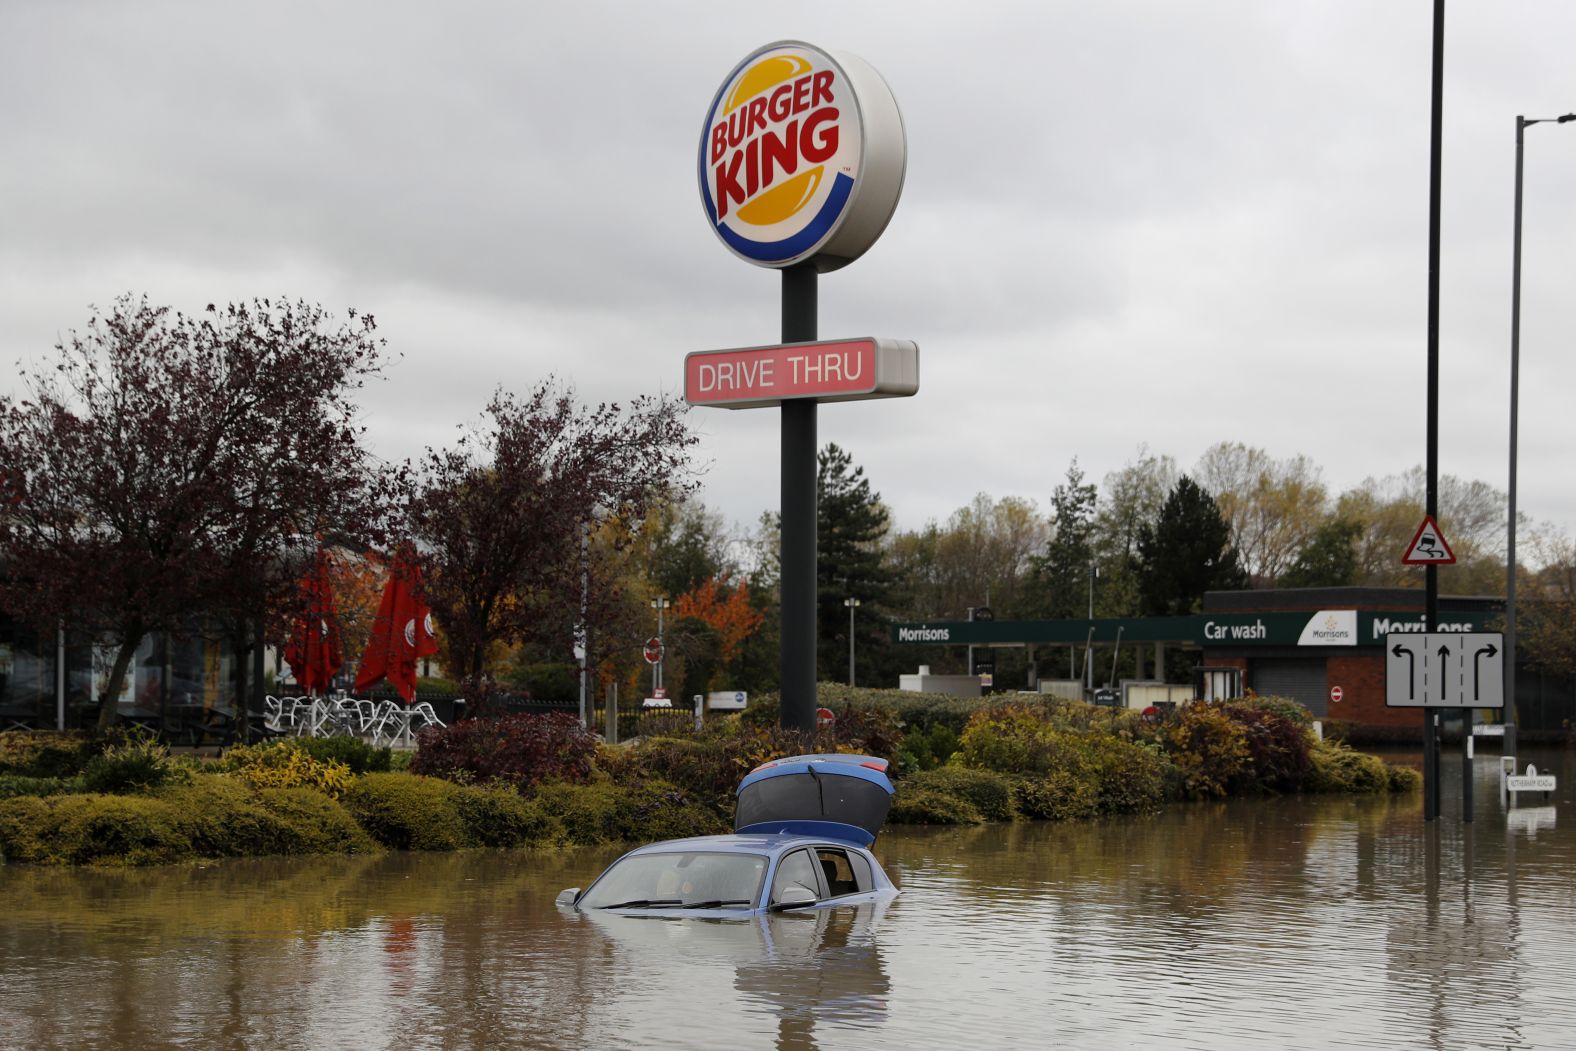 An abandoned car stands in floodwaters outside a Burger King restaurant in Rotherham.